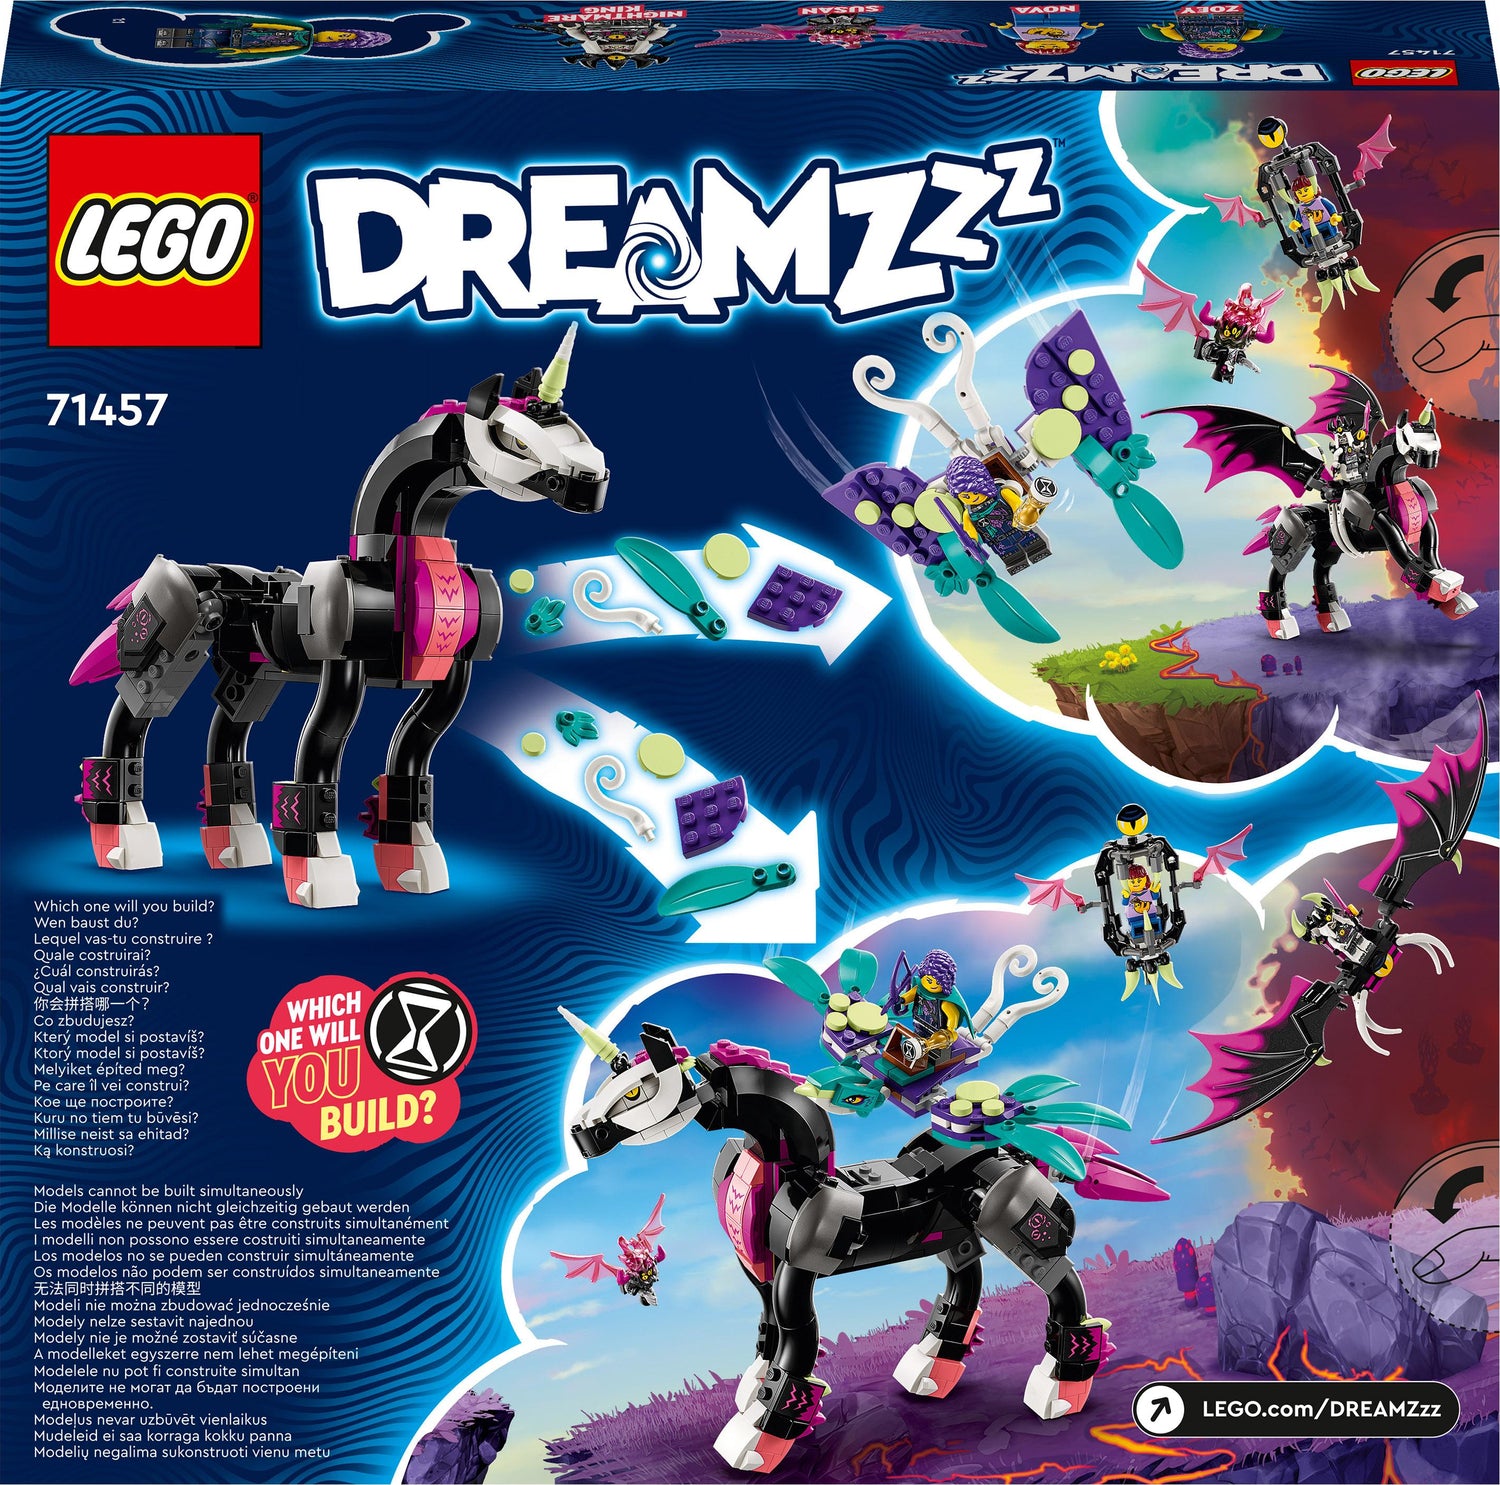 LEGO® DREAMZzz Pegasus Flying Horse Toy 2 in 1